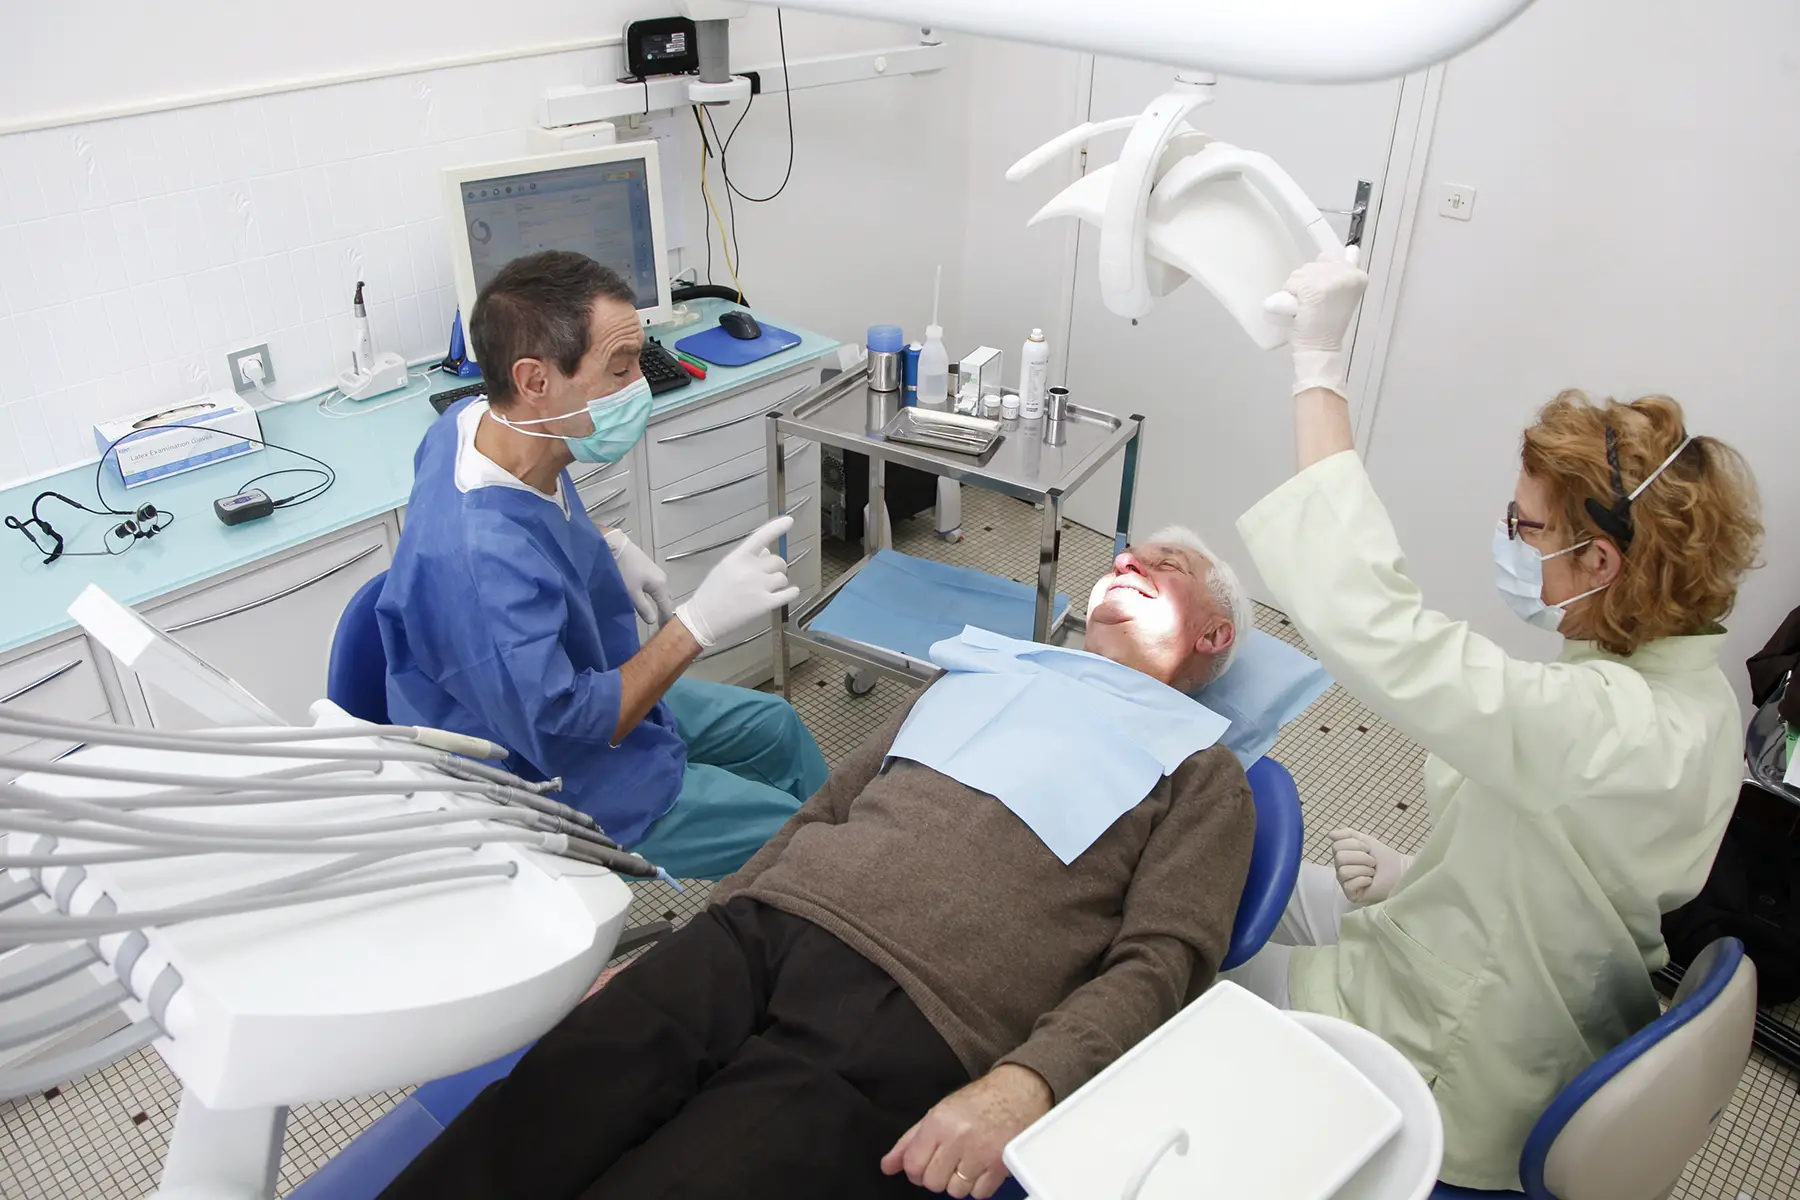 Dentist and assistant working on patient in dentist chair